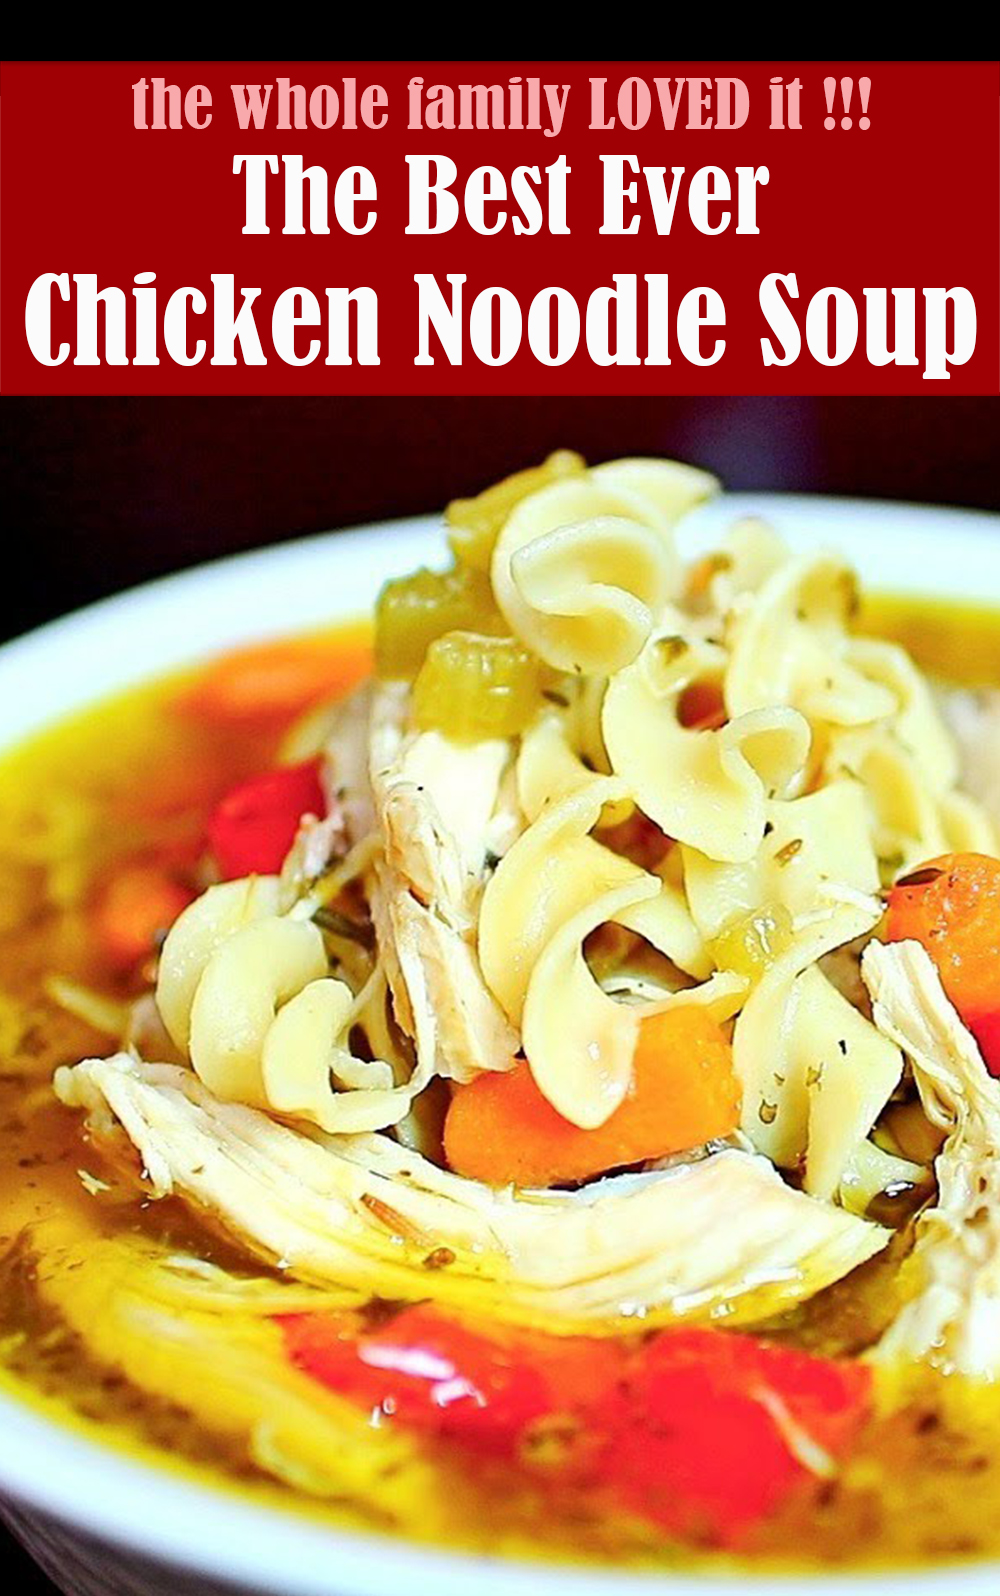 The Best Ever Chicken Noodle Soup Recipe